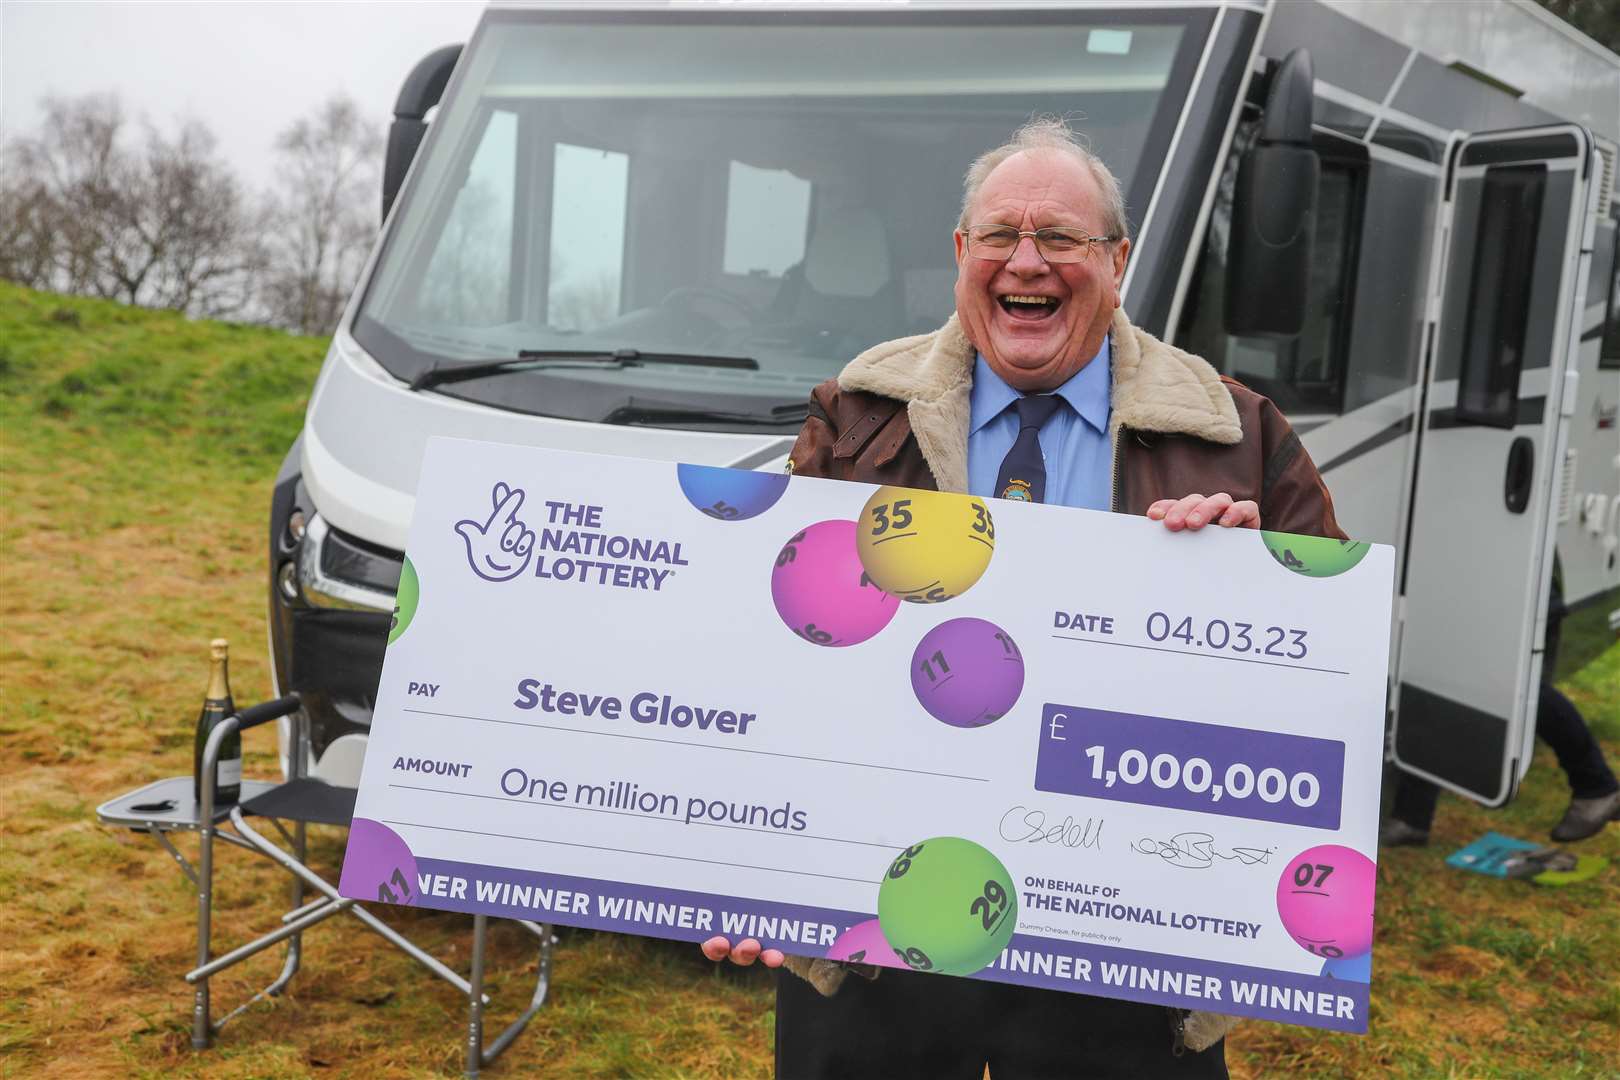 Steve Glover will return to the Scottish Highlands after his lotto win (Martin Bennett/National Lottery/PA)